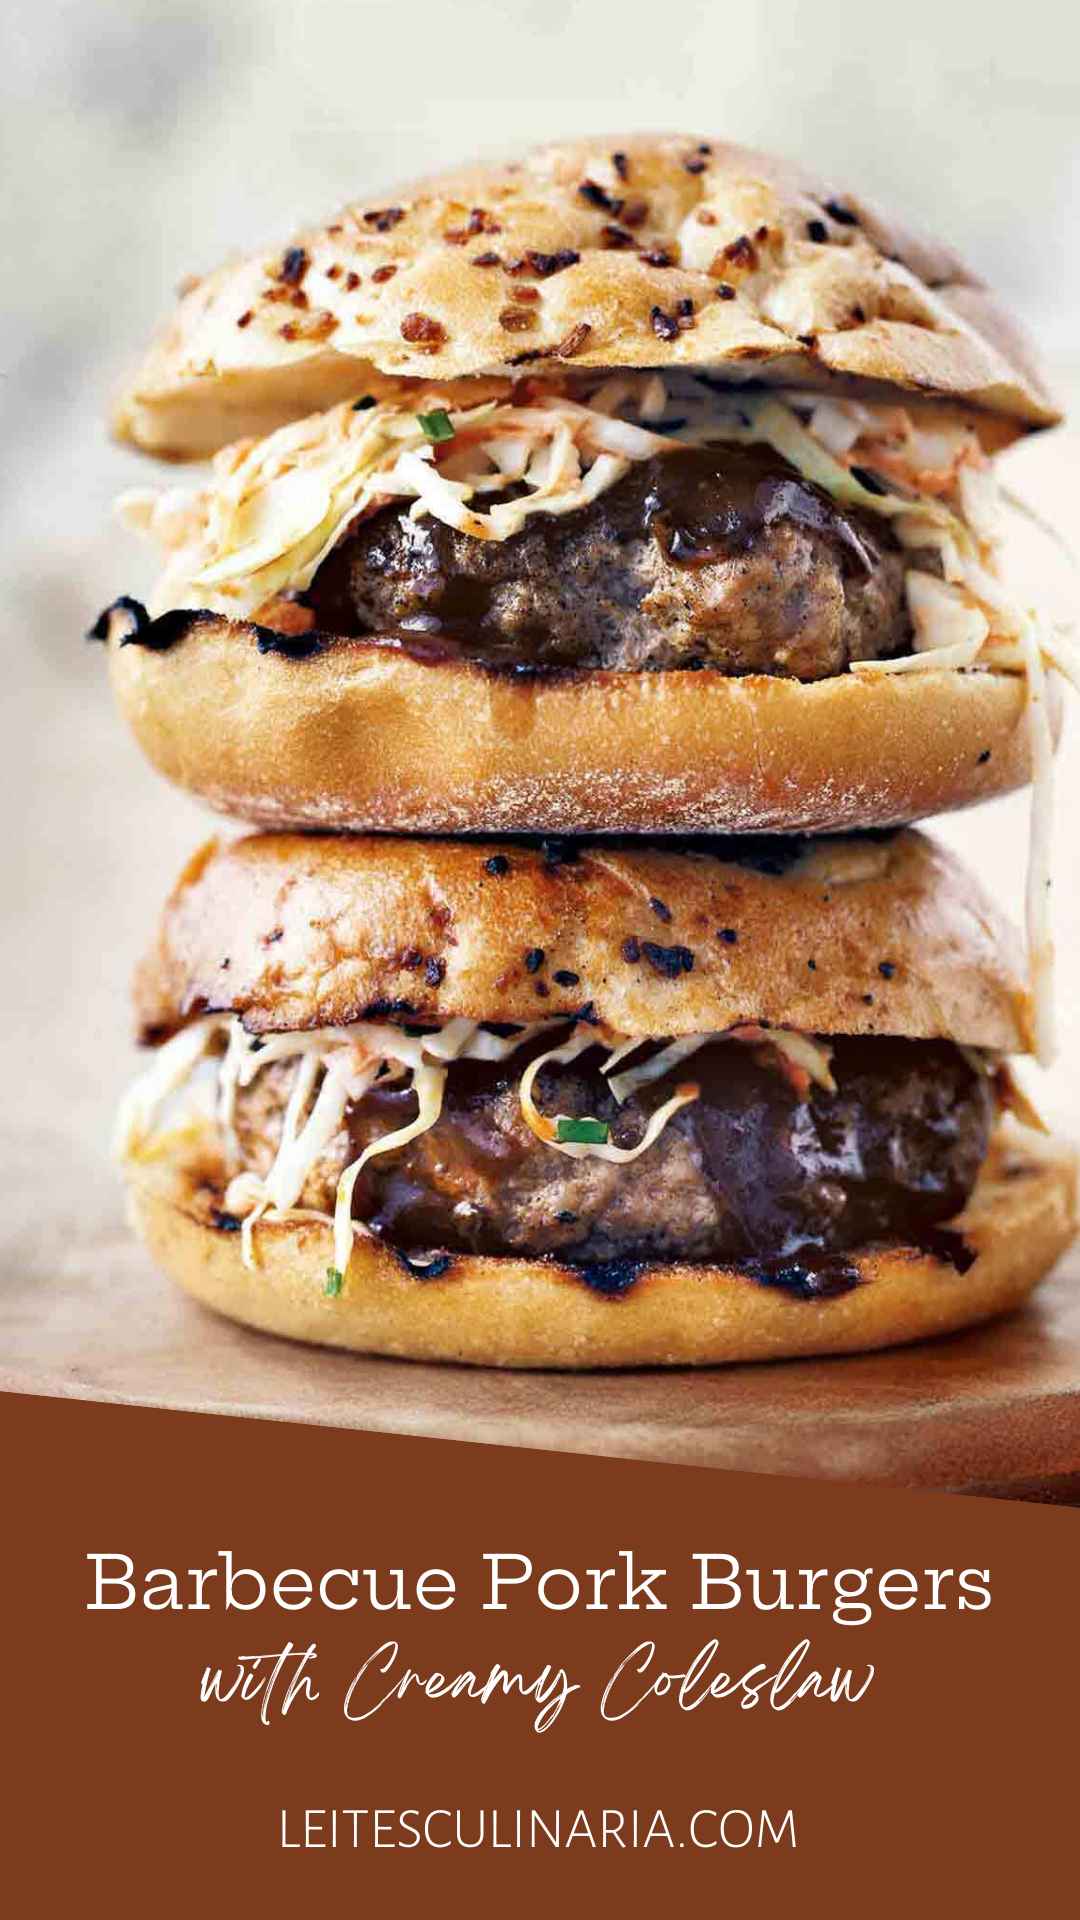 Two barbecue pork burgers with coleslaw and barbecue sauce on onion buns stacked on top of each other.